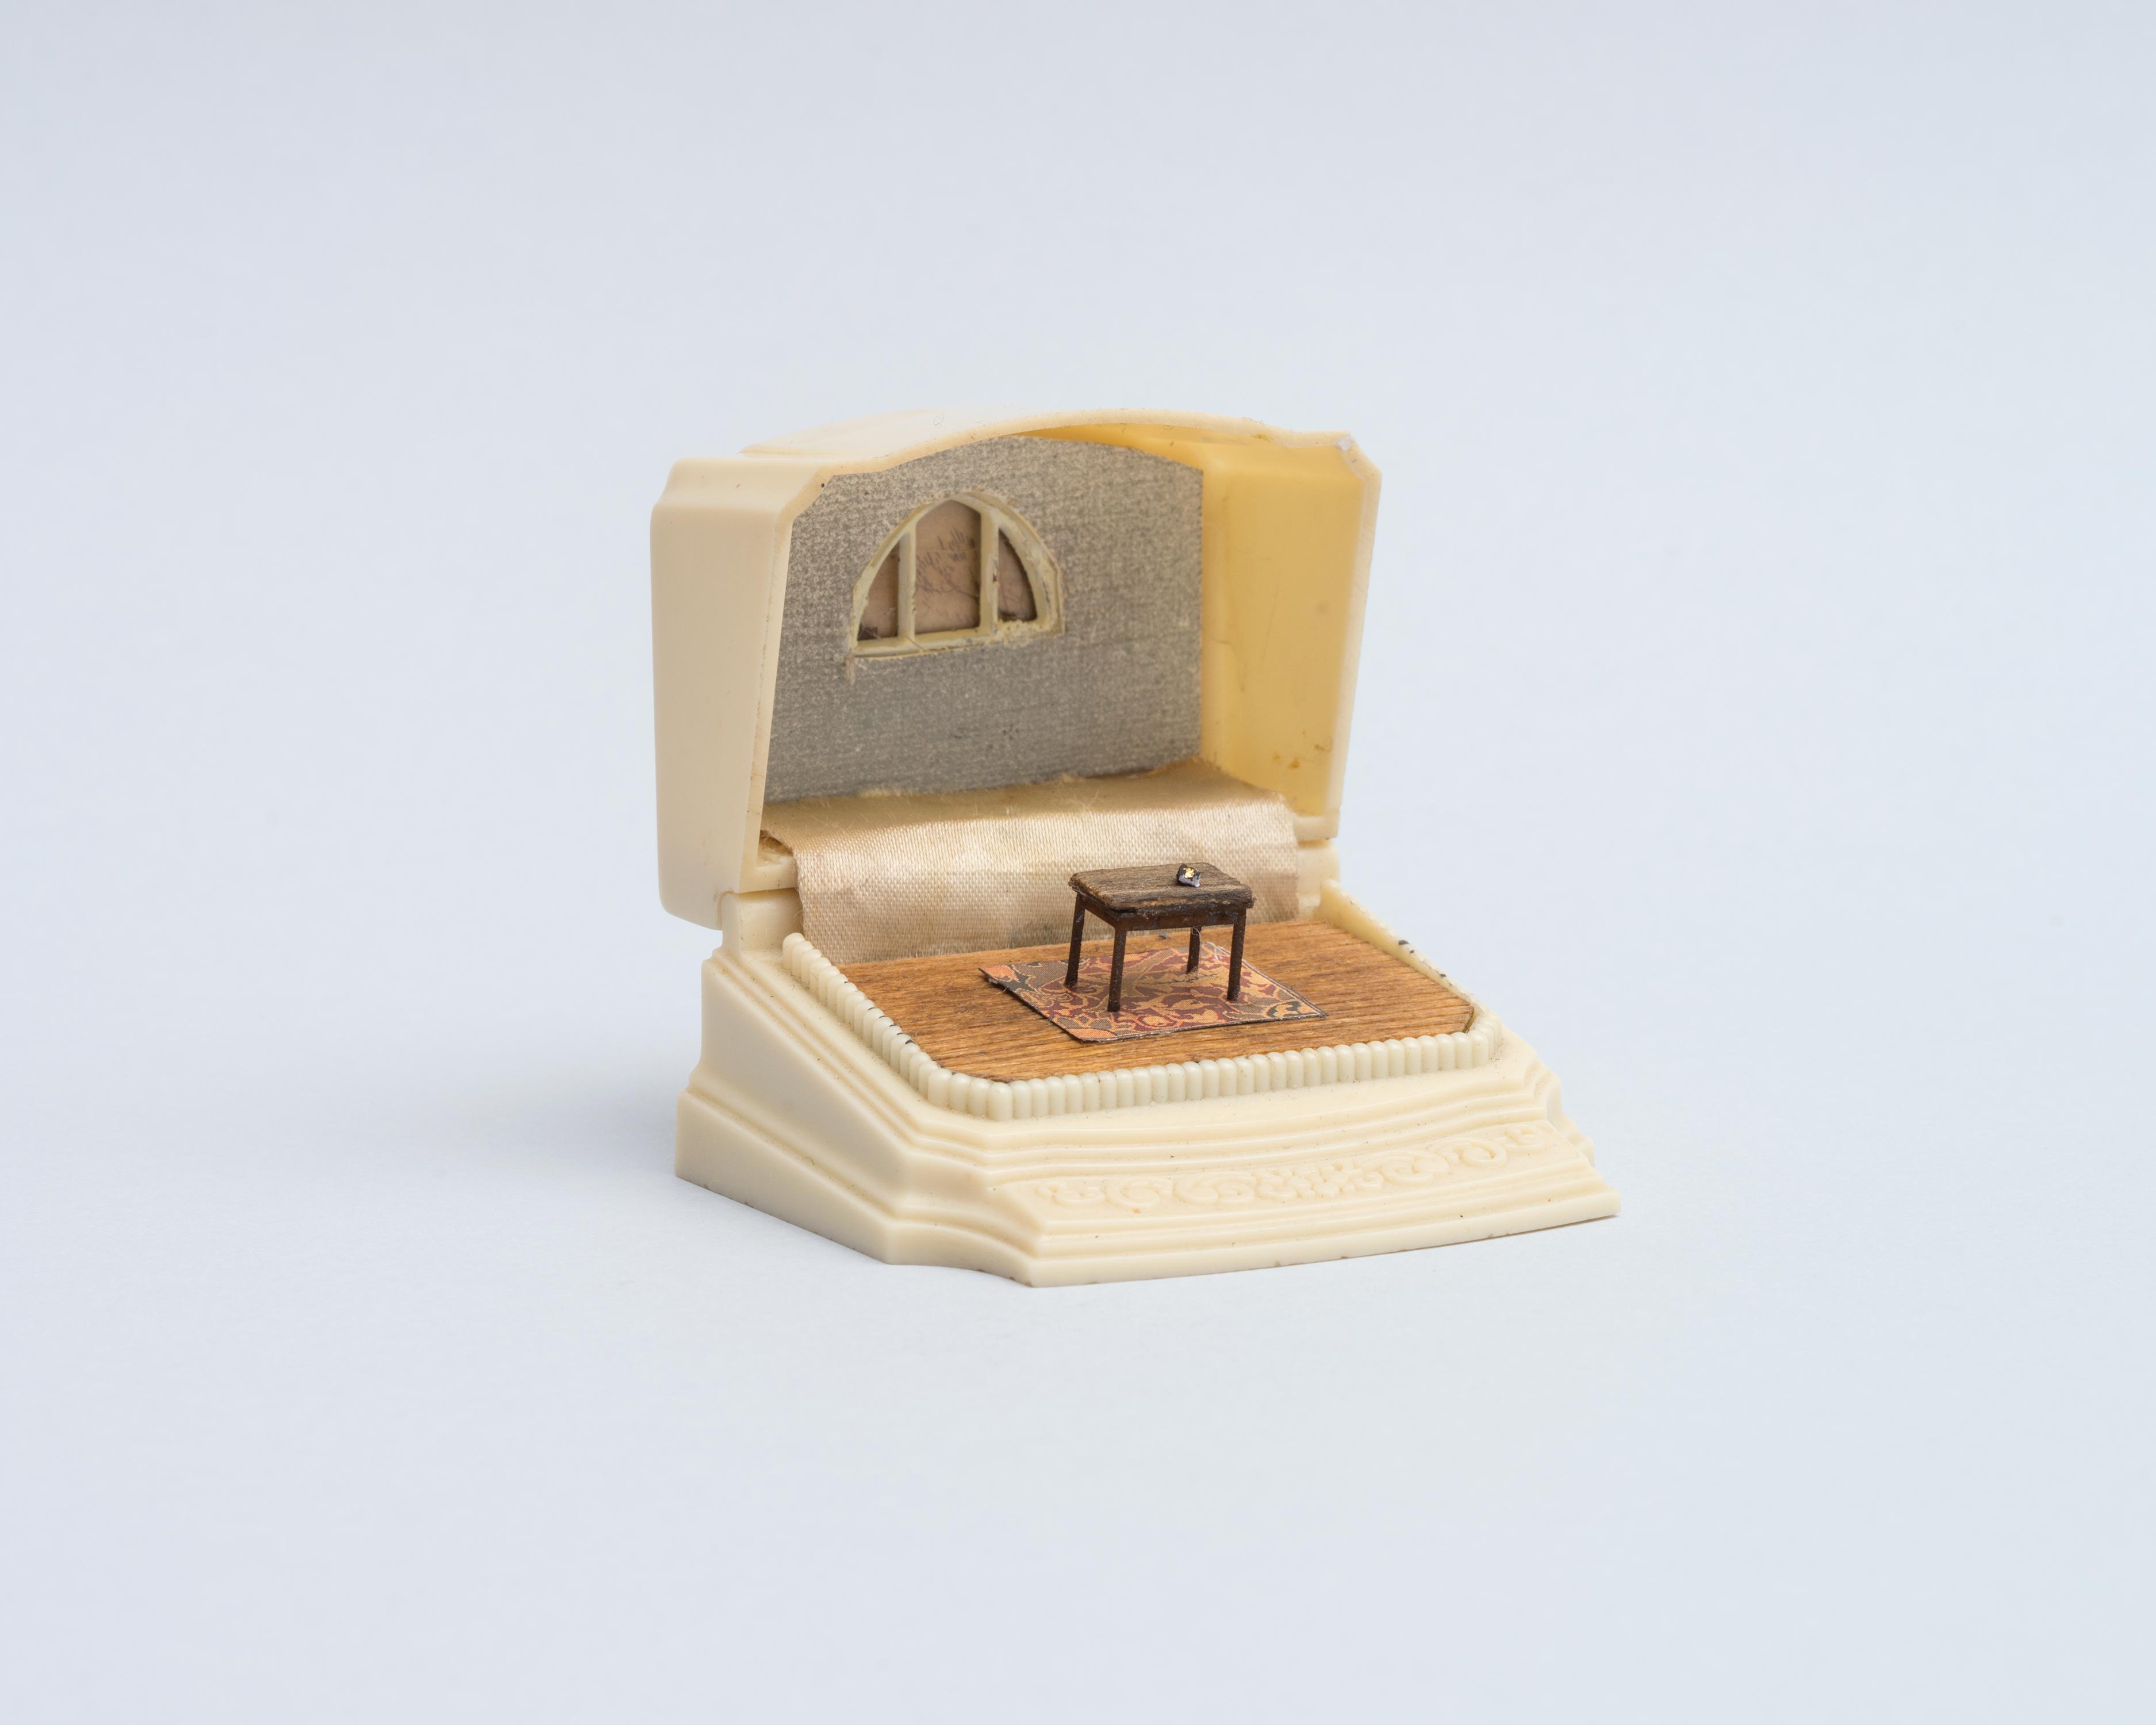 Curtis Talwst Santiago<br>1663 John Eliot's Algonquin (Native American Bible)<br>2016<br>Mixed media diorama in reclaimed jewelry box<br>2.625 x 2 x 2.5 in (6.7 x 5 x 6.4cm)